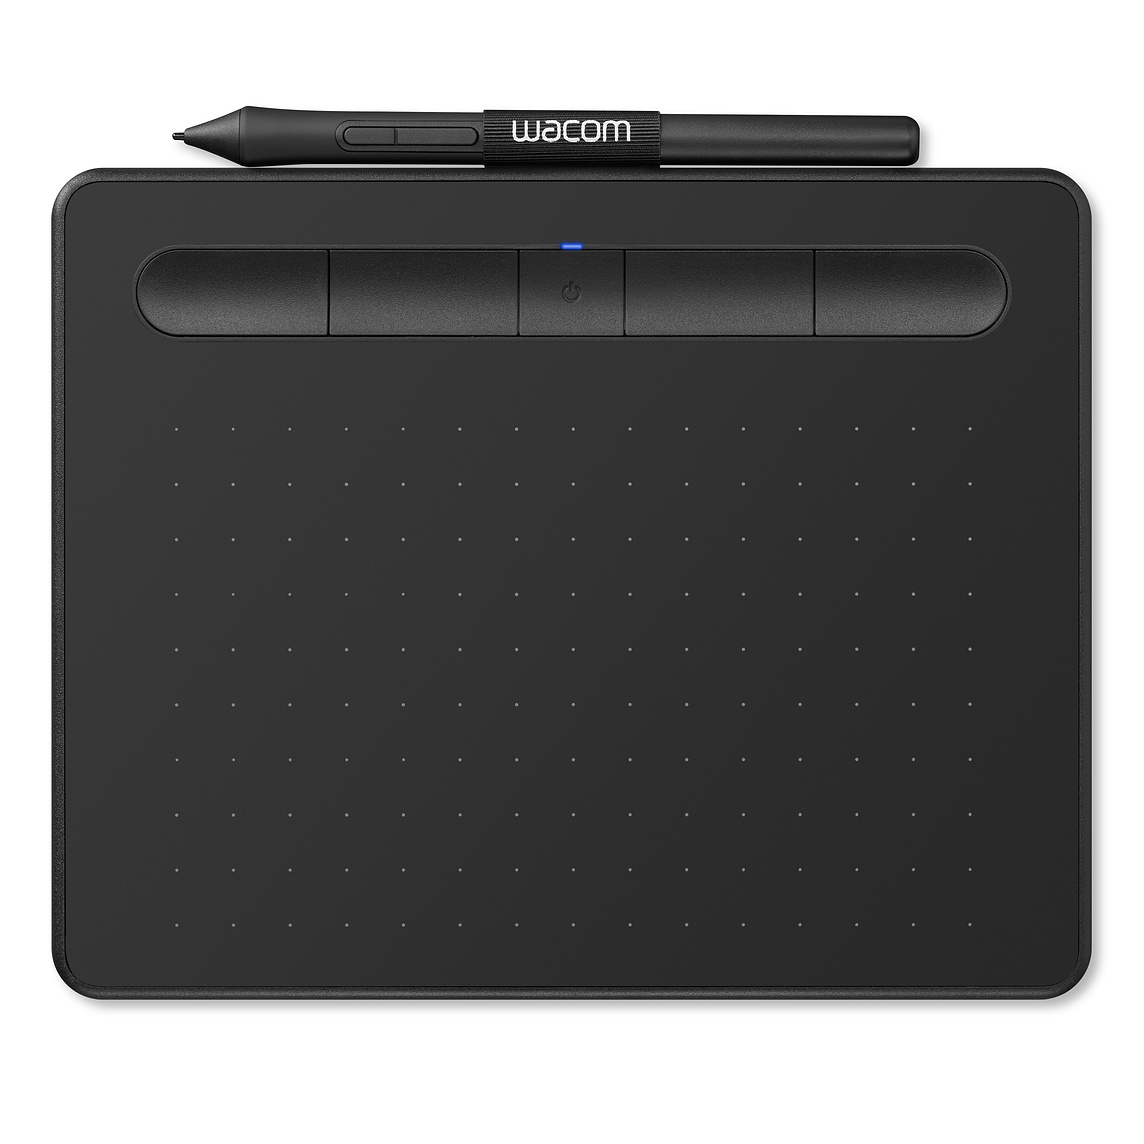  Drawing Tablet: Intuos Medium, Wired/Bluetooth, Black Colour  